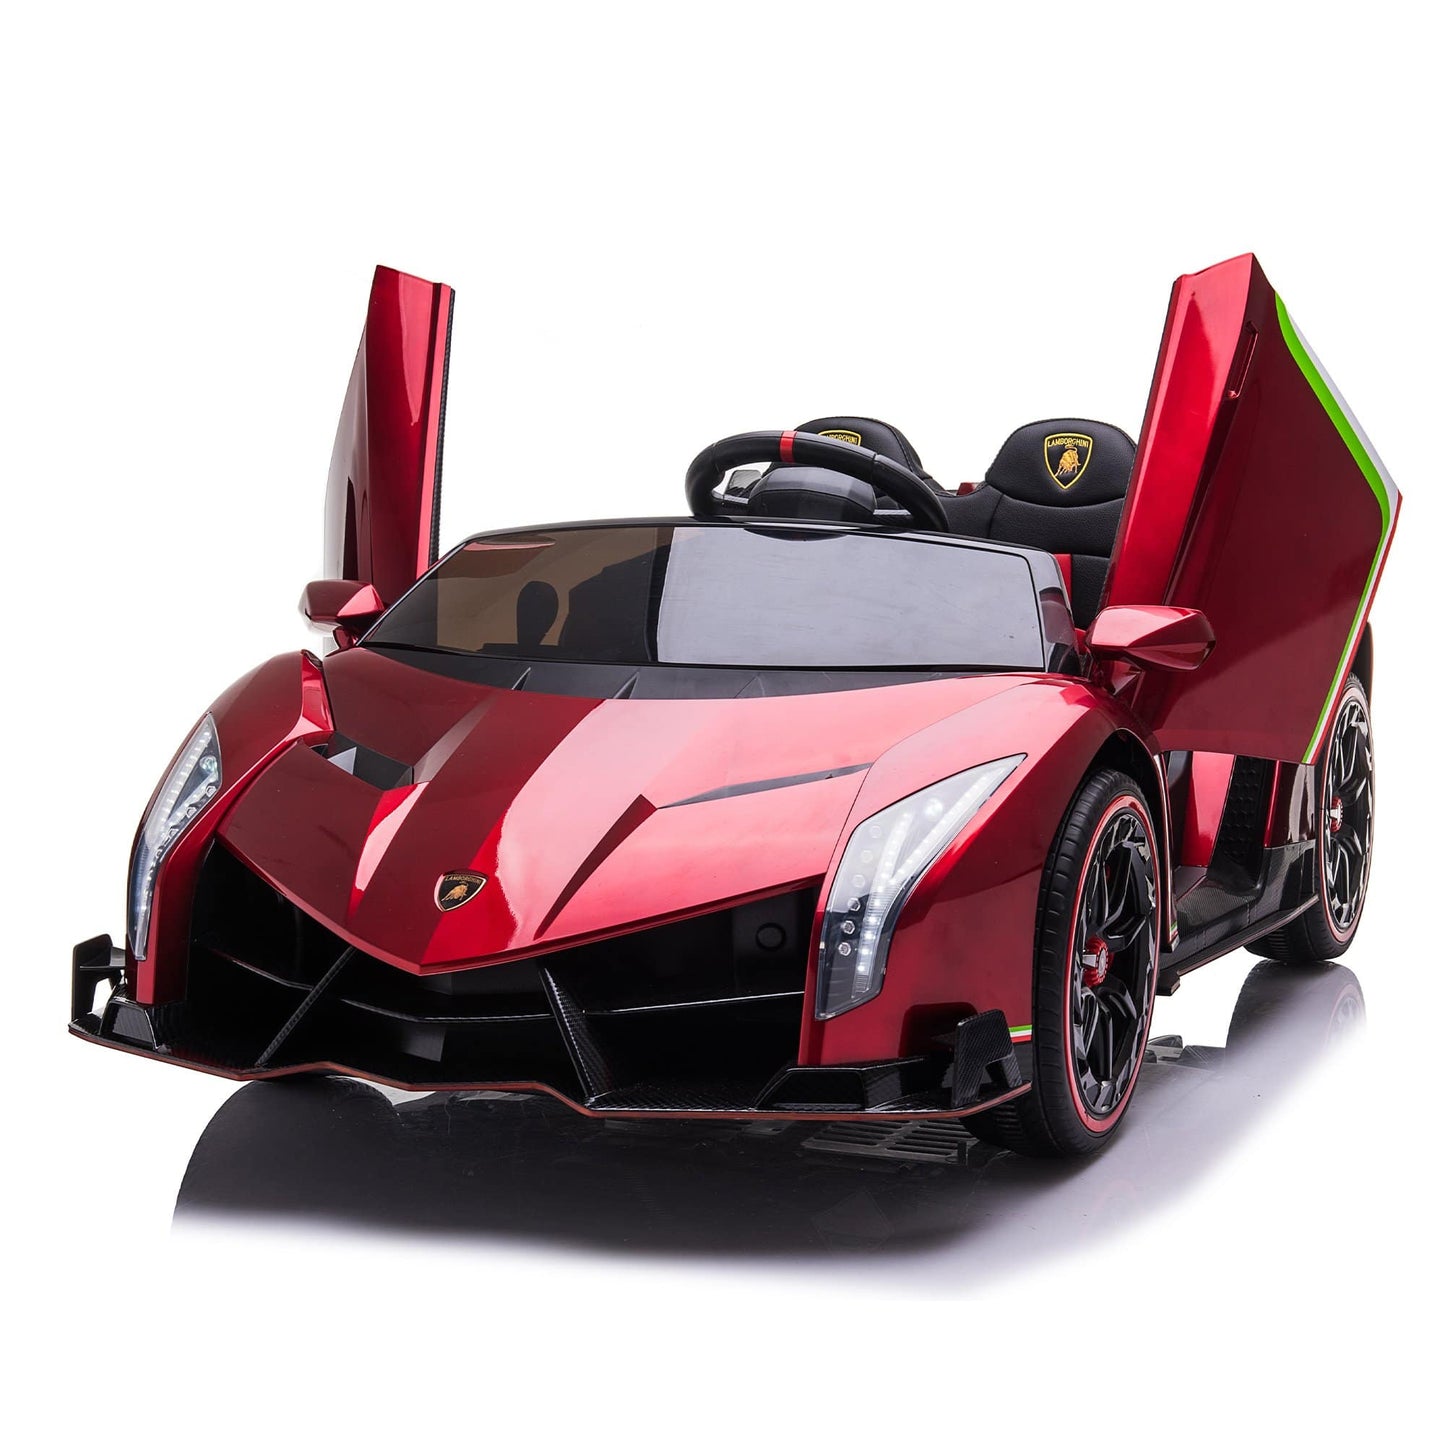 24V 4x4 Lamborghini Veneno 2 Seater Ride on with Parental Remote Control for 3-8 Years (Red)